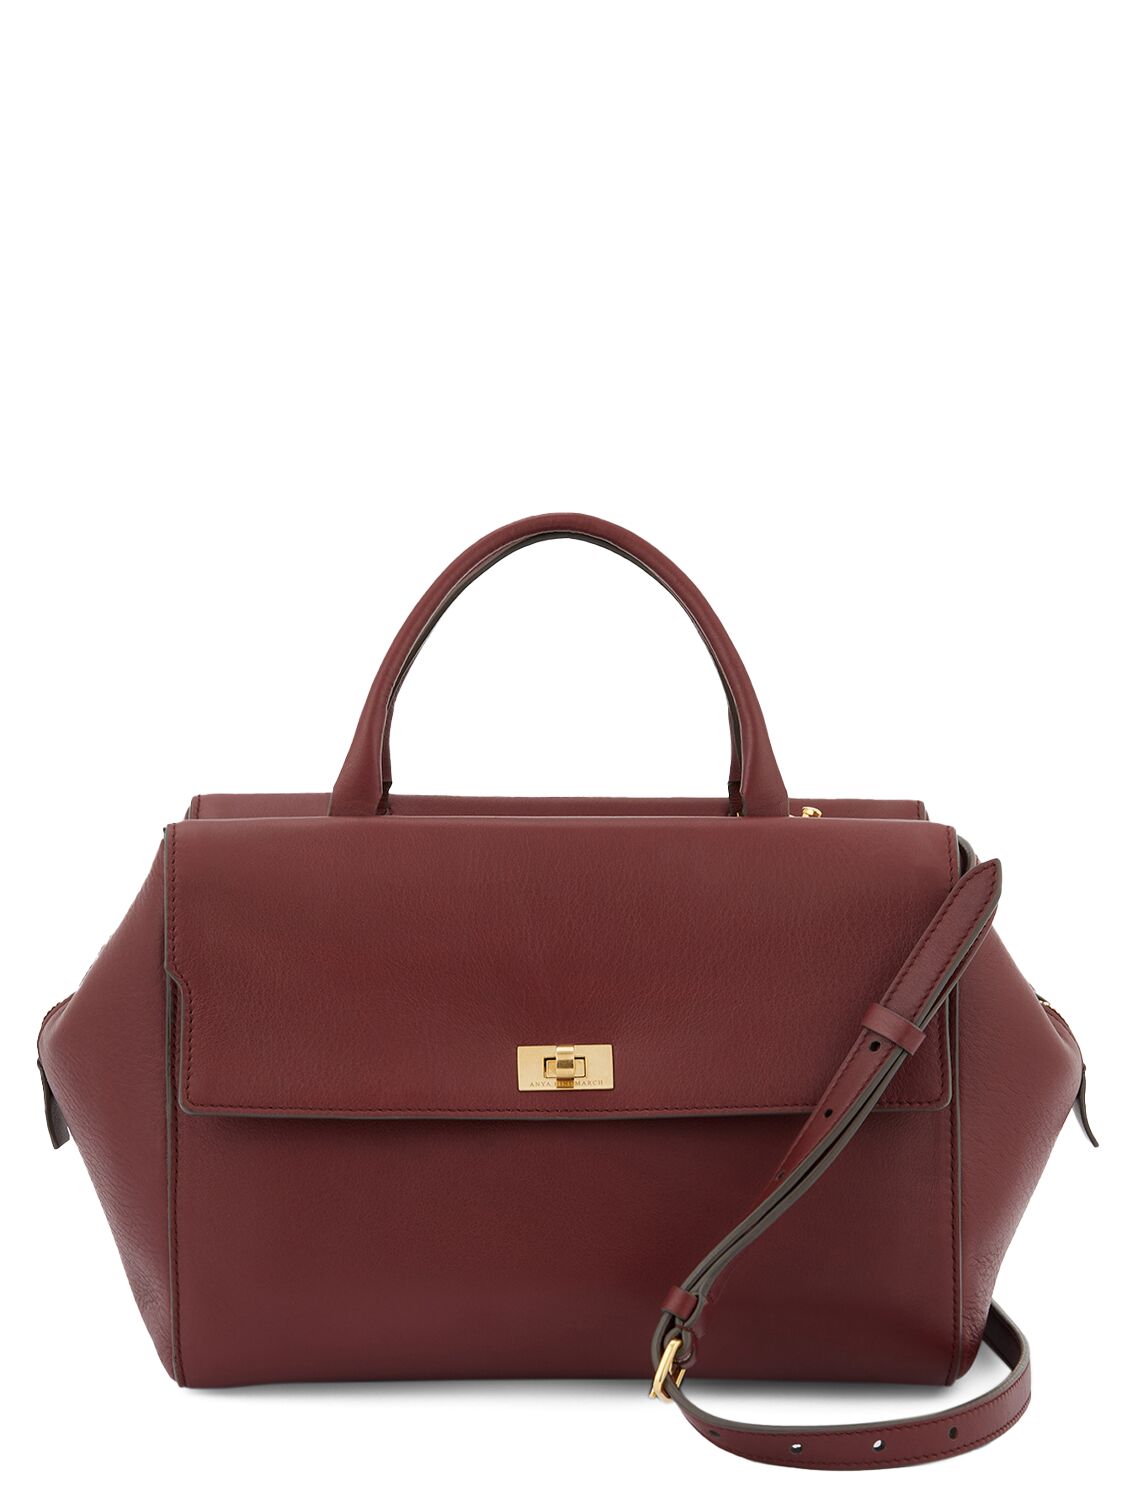 Anya Hindmarch Seaton Leather Tote Bag In Rosewood